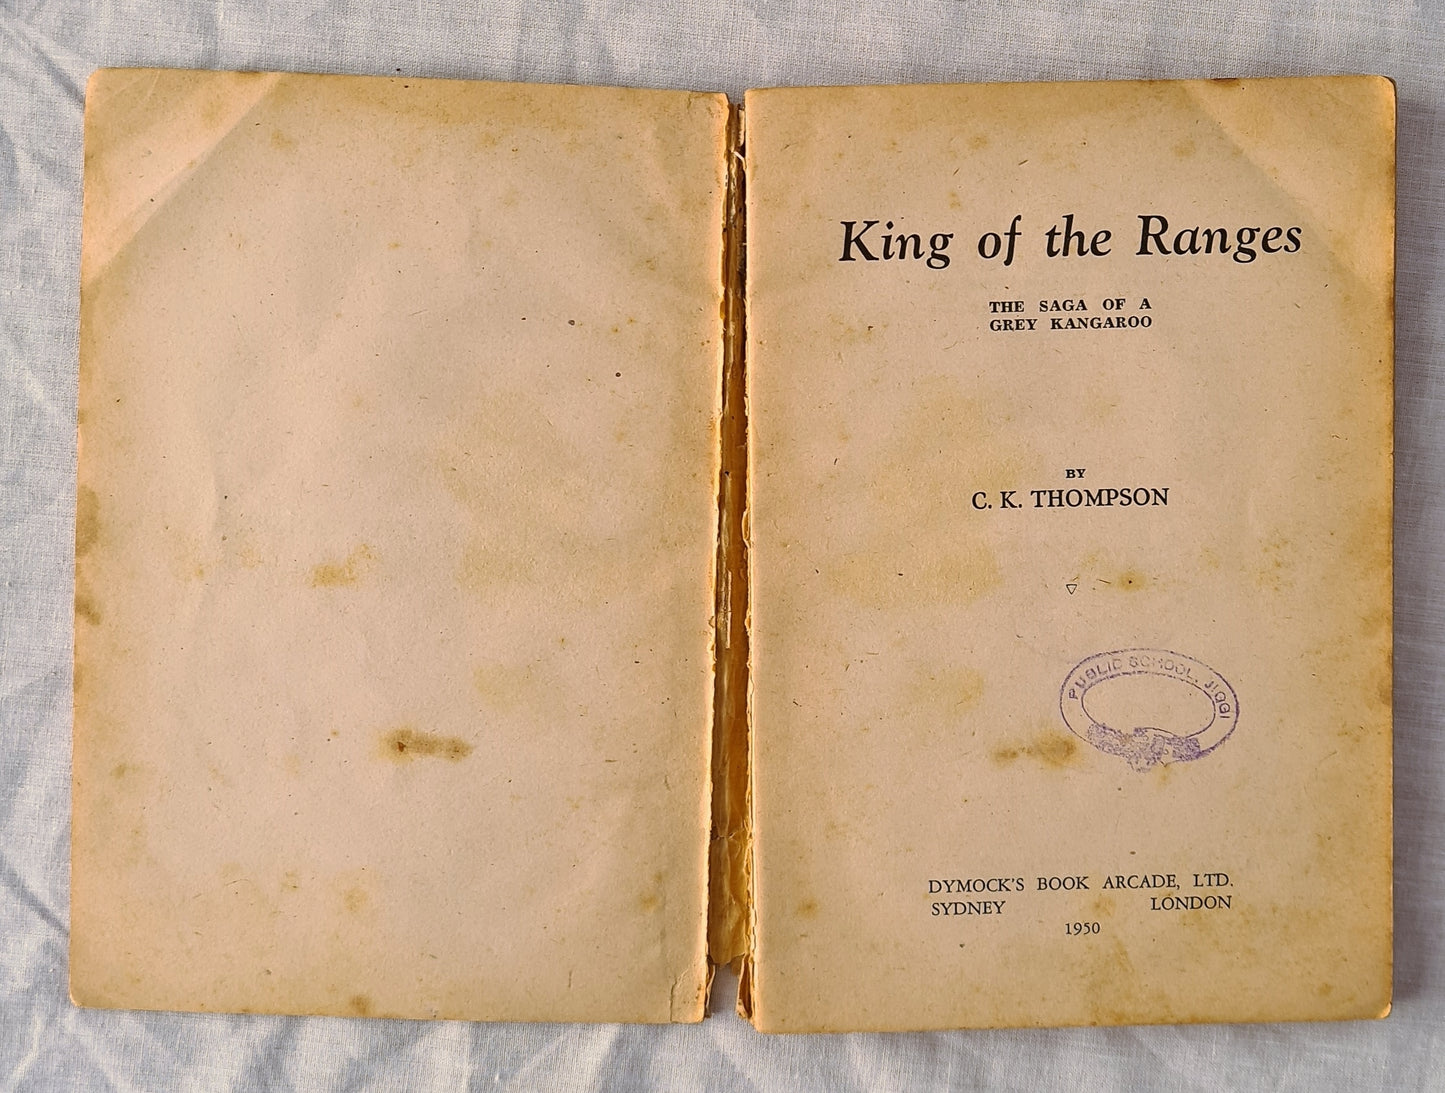 King of the Ranges by C. K. Thompson